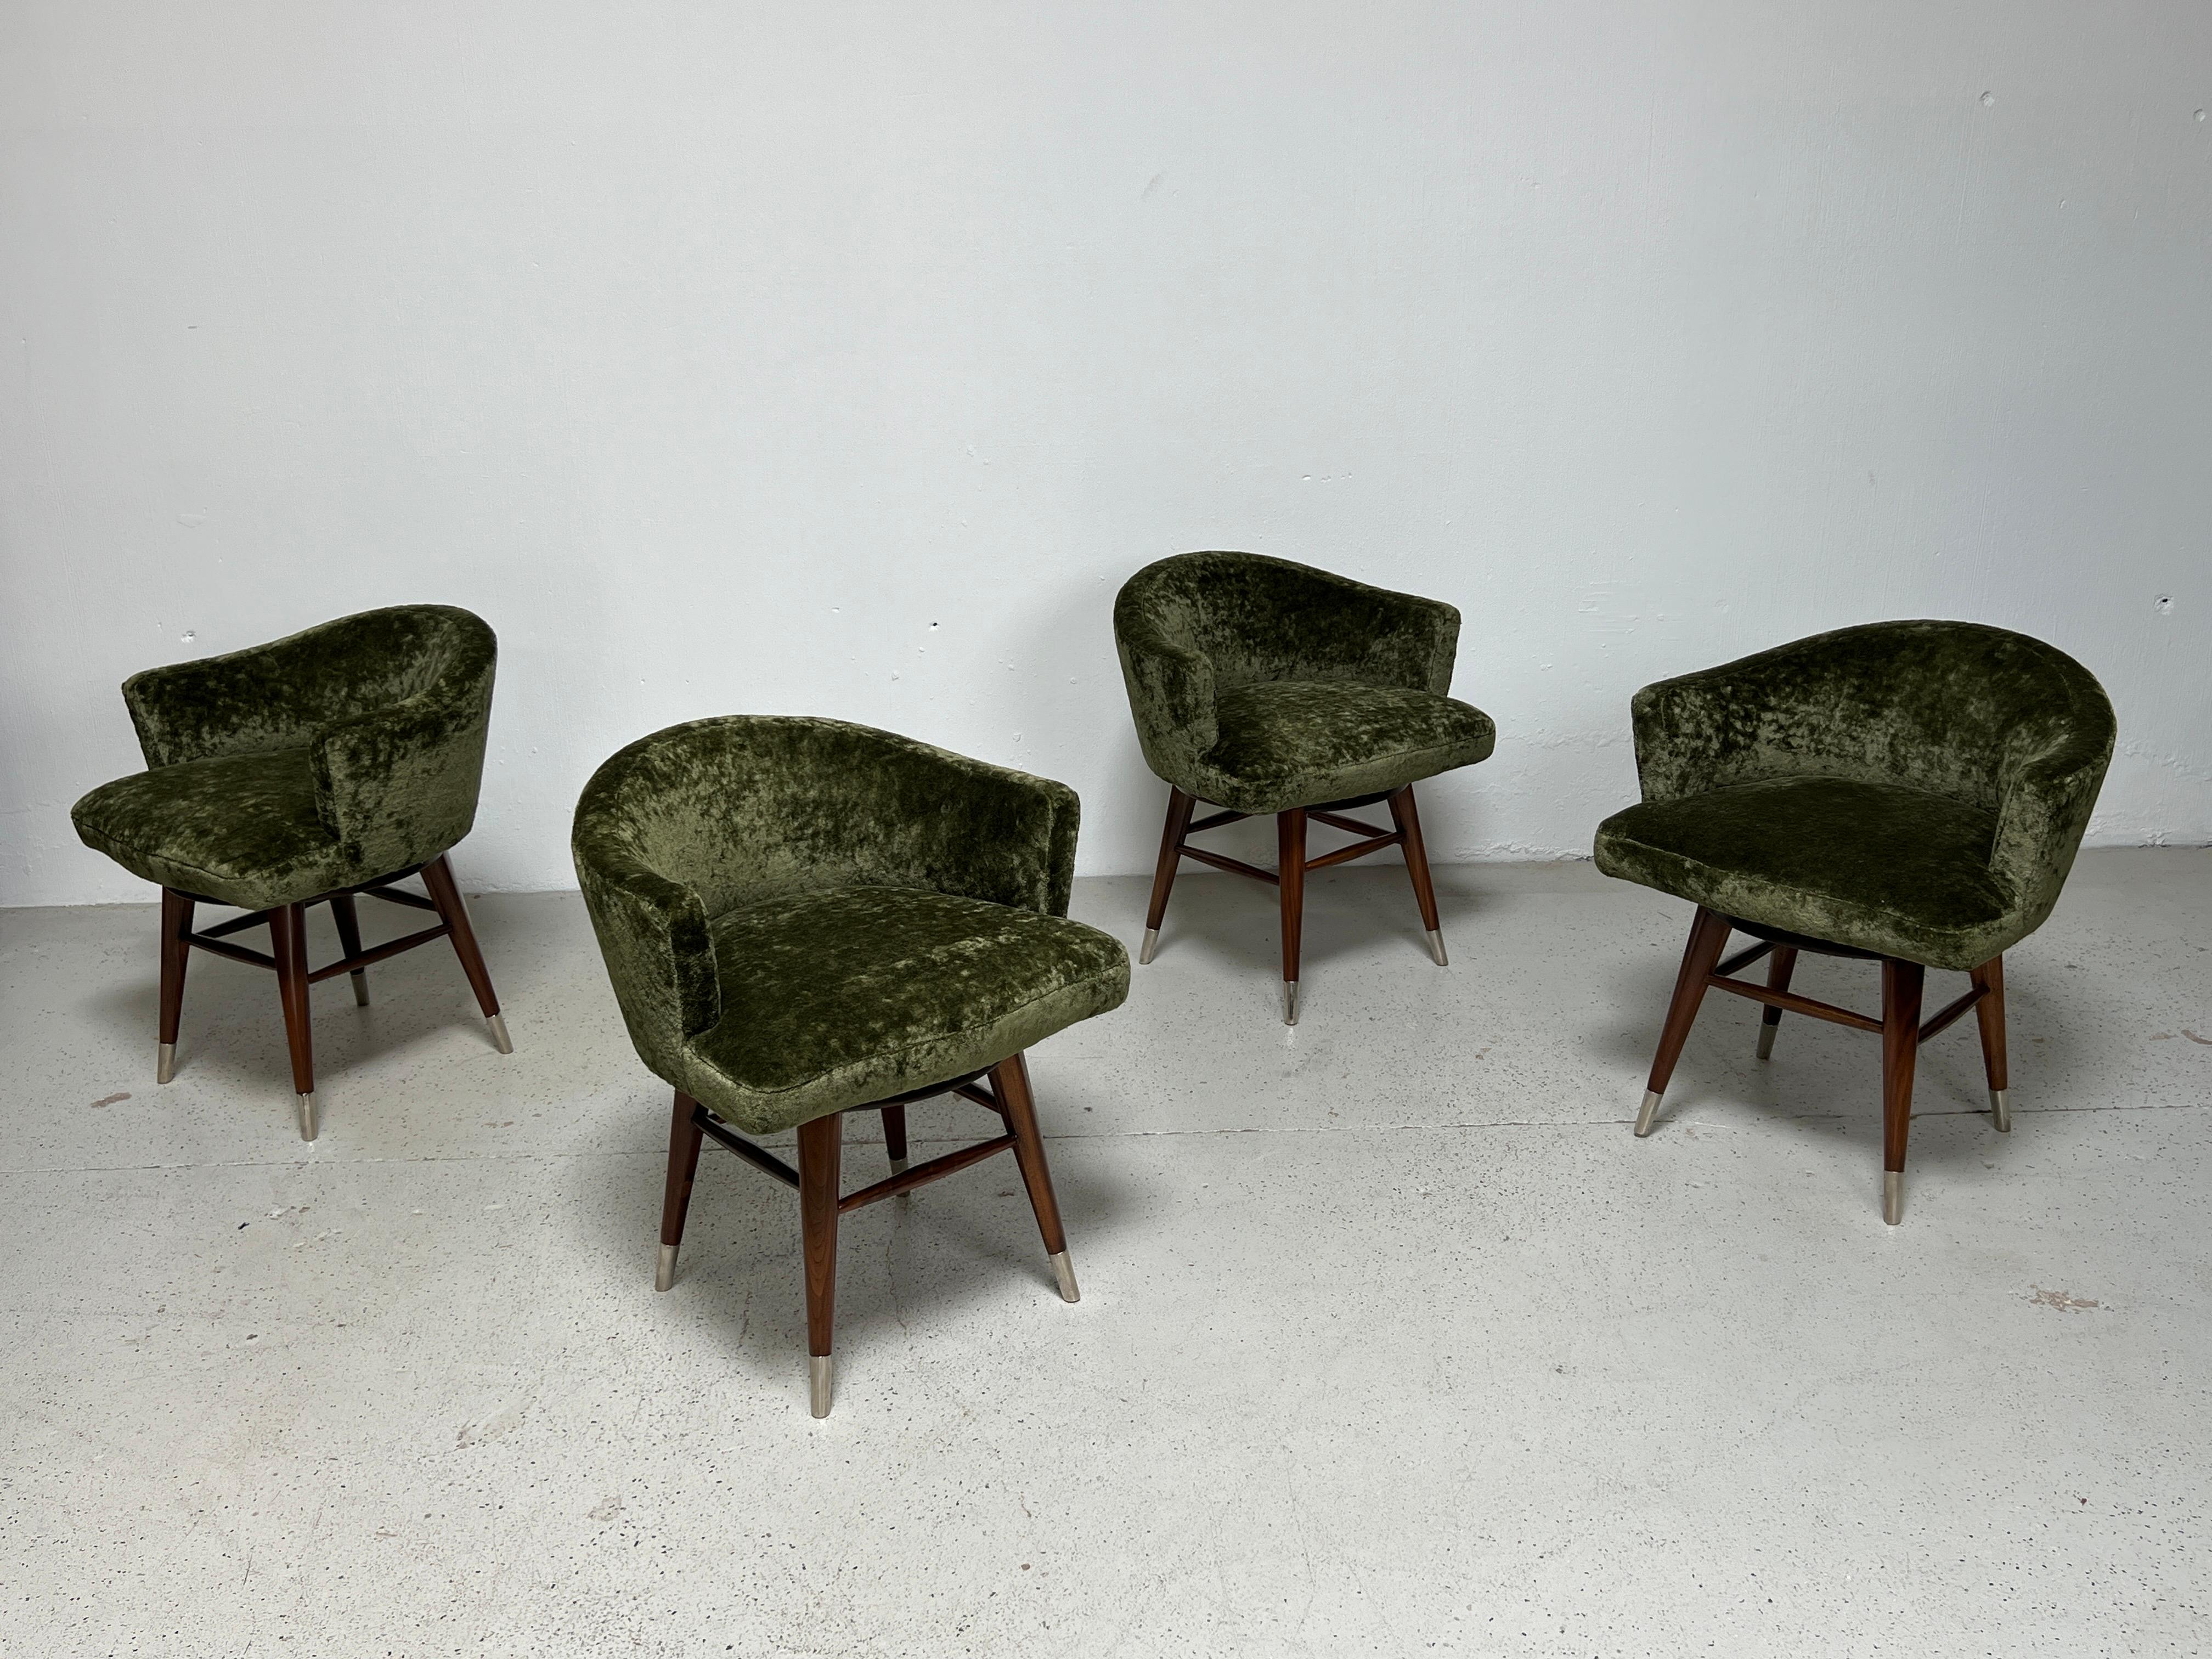 A set of four Edward Wormley for Dunbar swiveling stools / chairs with mahogany legs and chrome sabots. Fully restored and upholstered in Holly Hunt / Lush / Palm thick velvet.